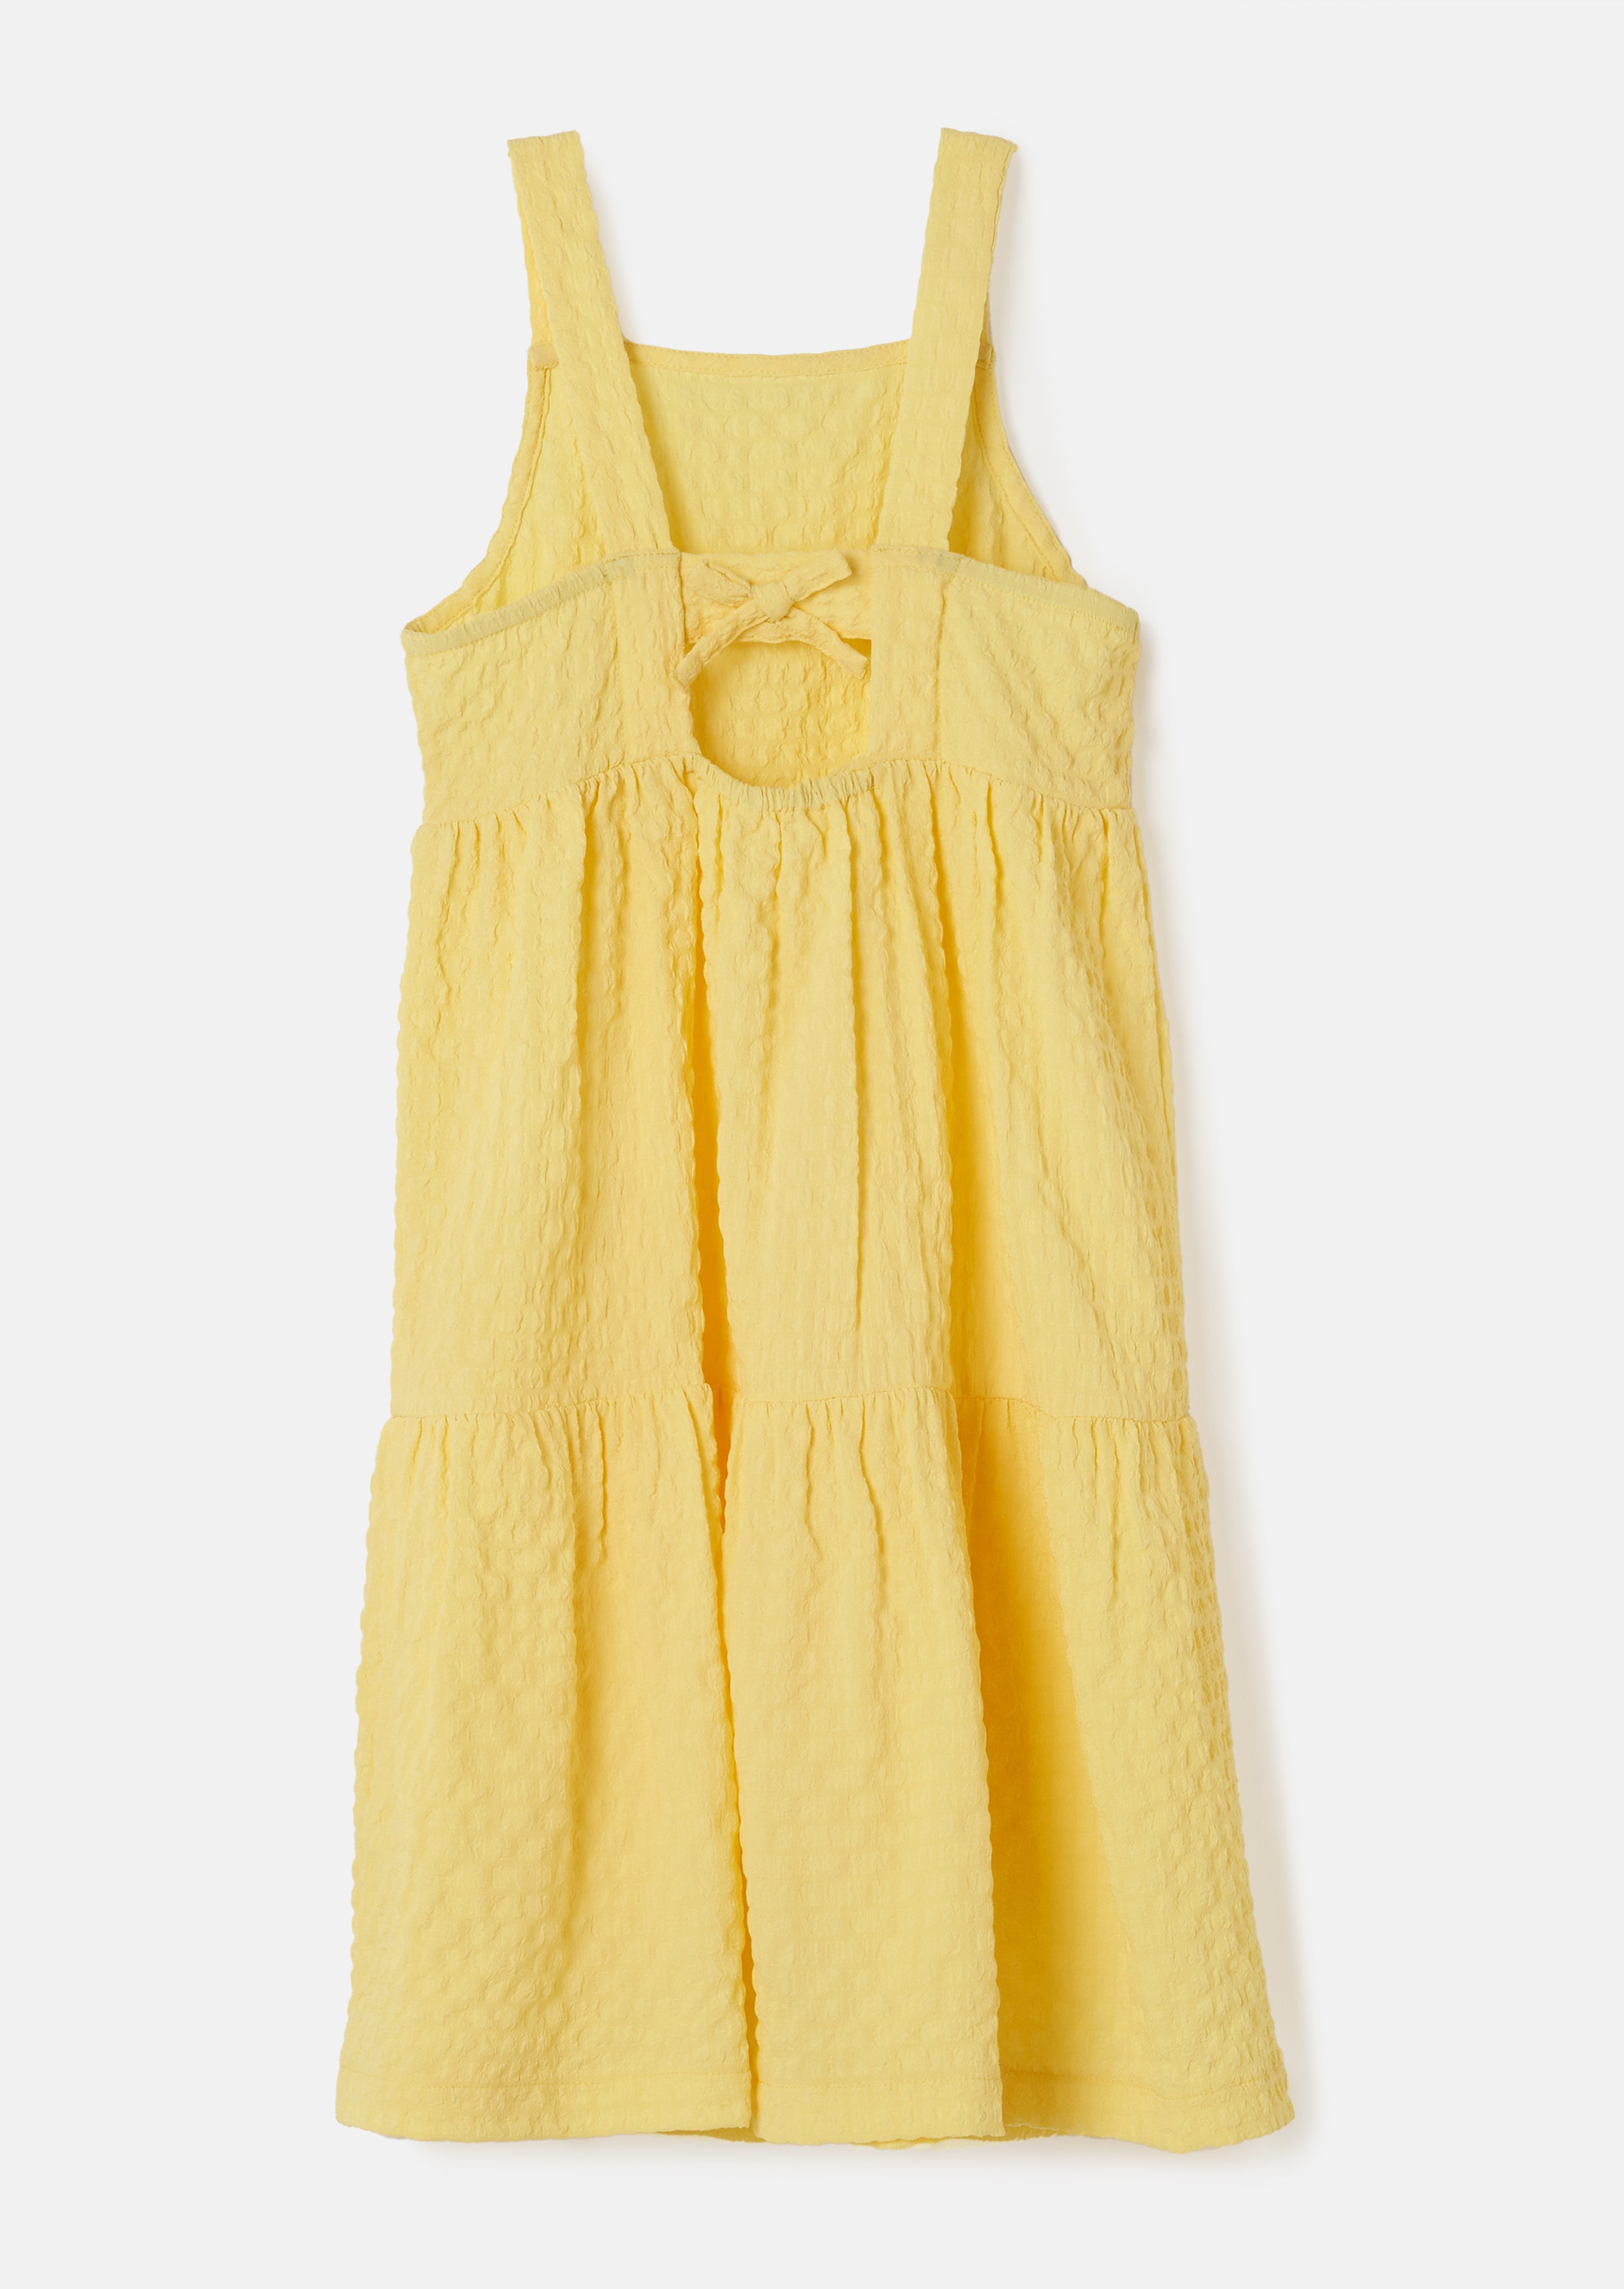 Girls Solid Yellow Crinkle Woven Dress